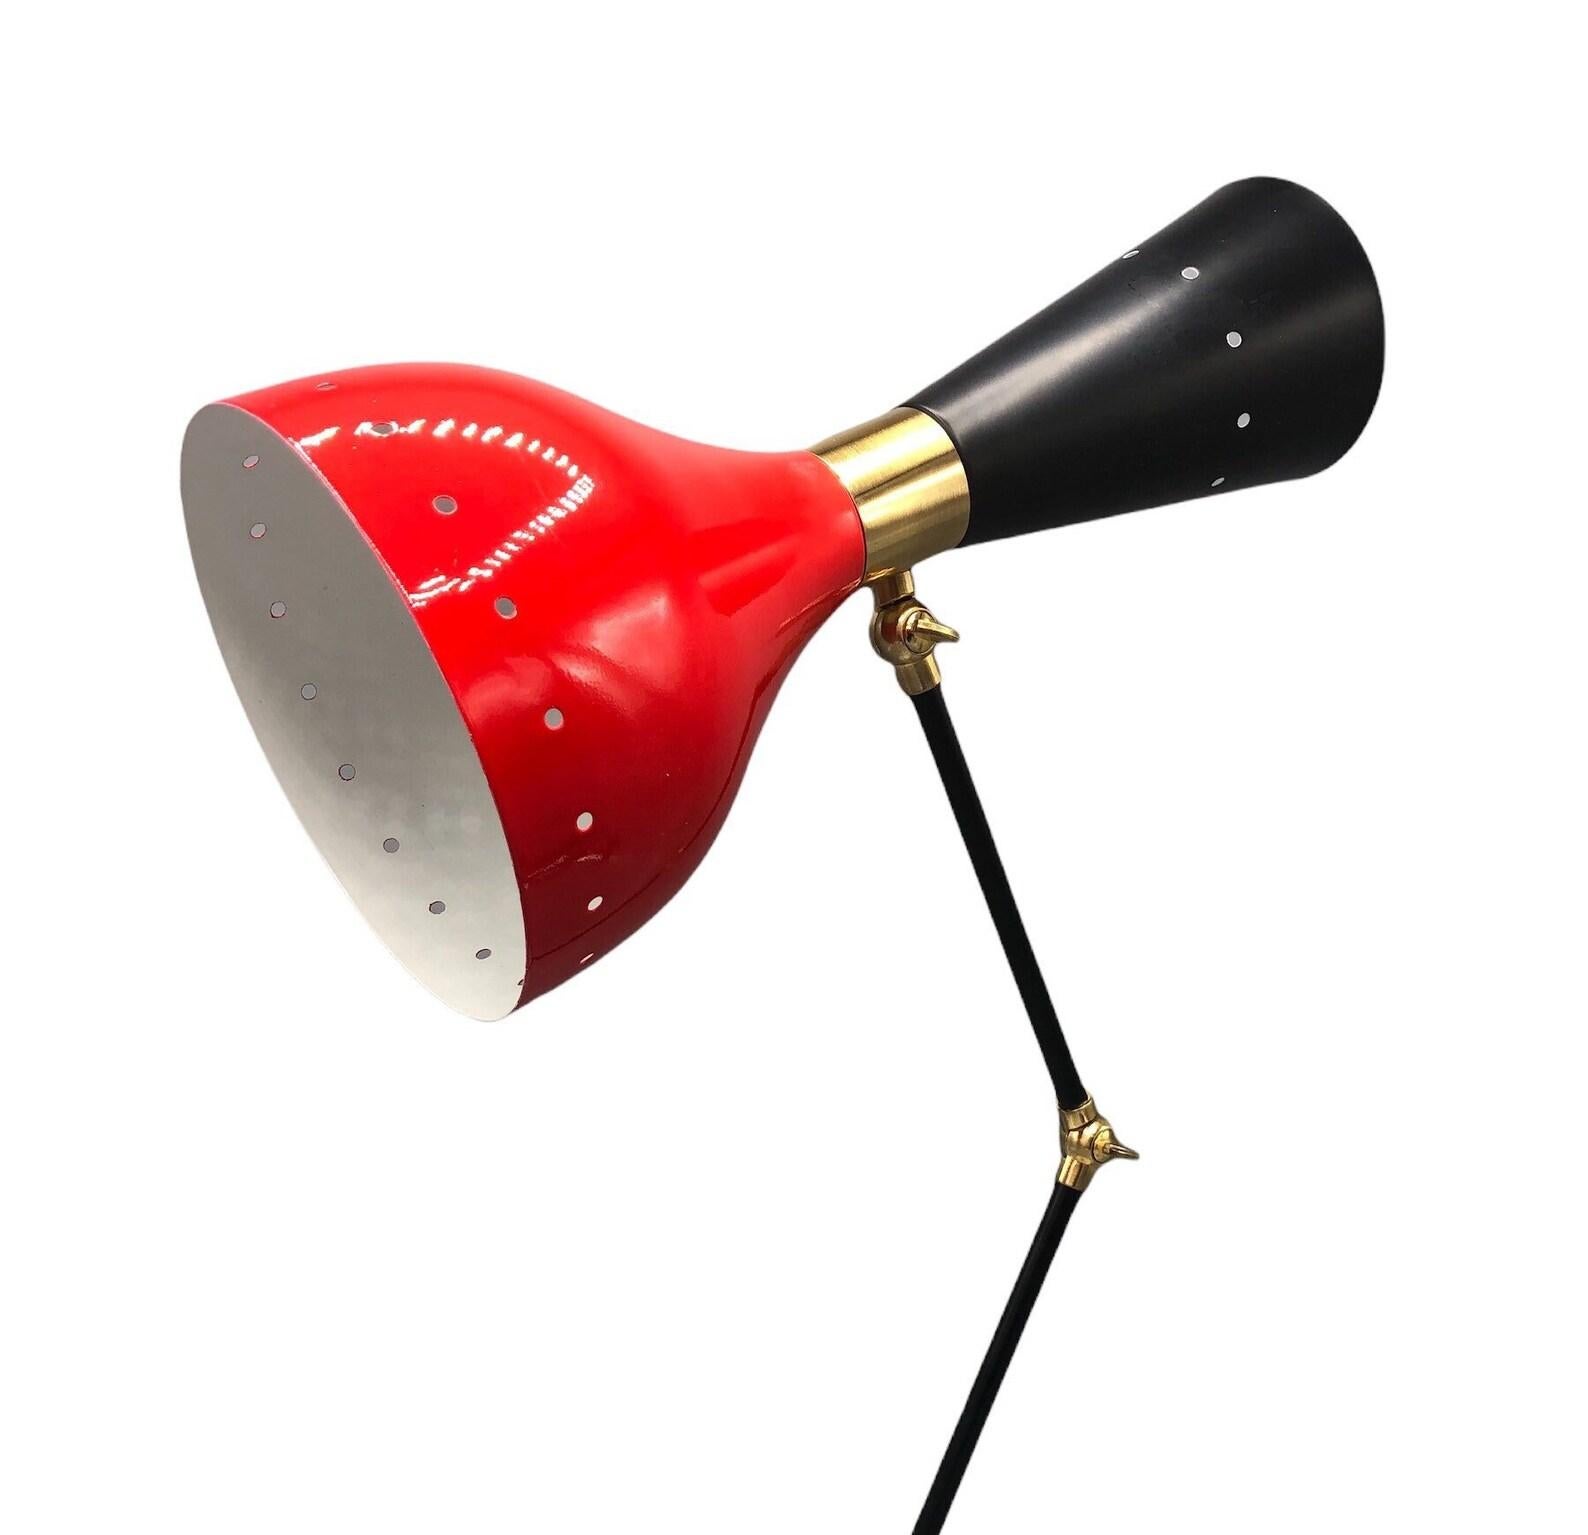 Modern Brass adjustable desk lamp with marble base Italian style. Red shade and black arms with brass hardware. 
Dimensions: 
Base marble diameter: 7” inches 
Height can go up to 24” inches.